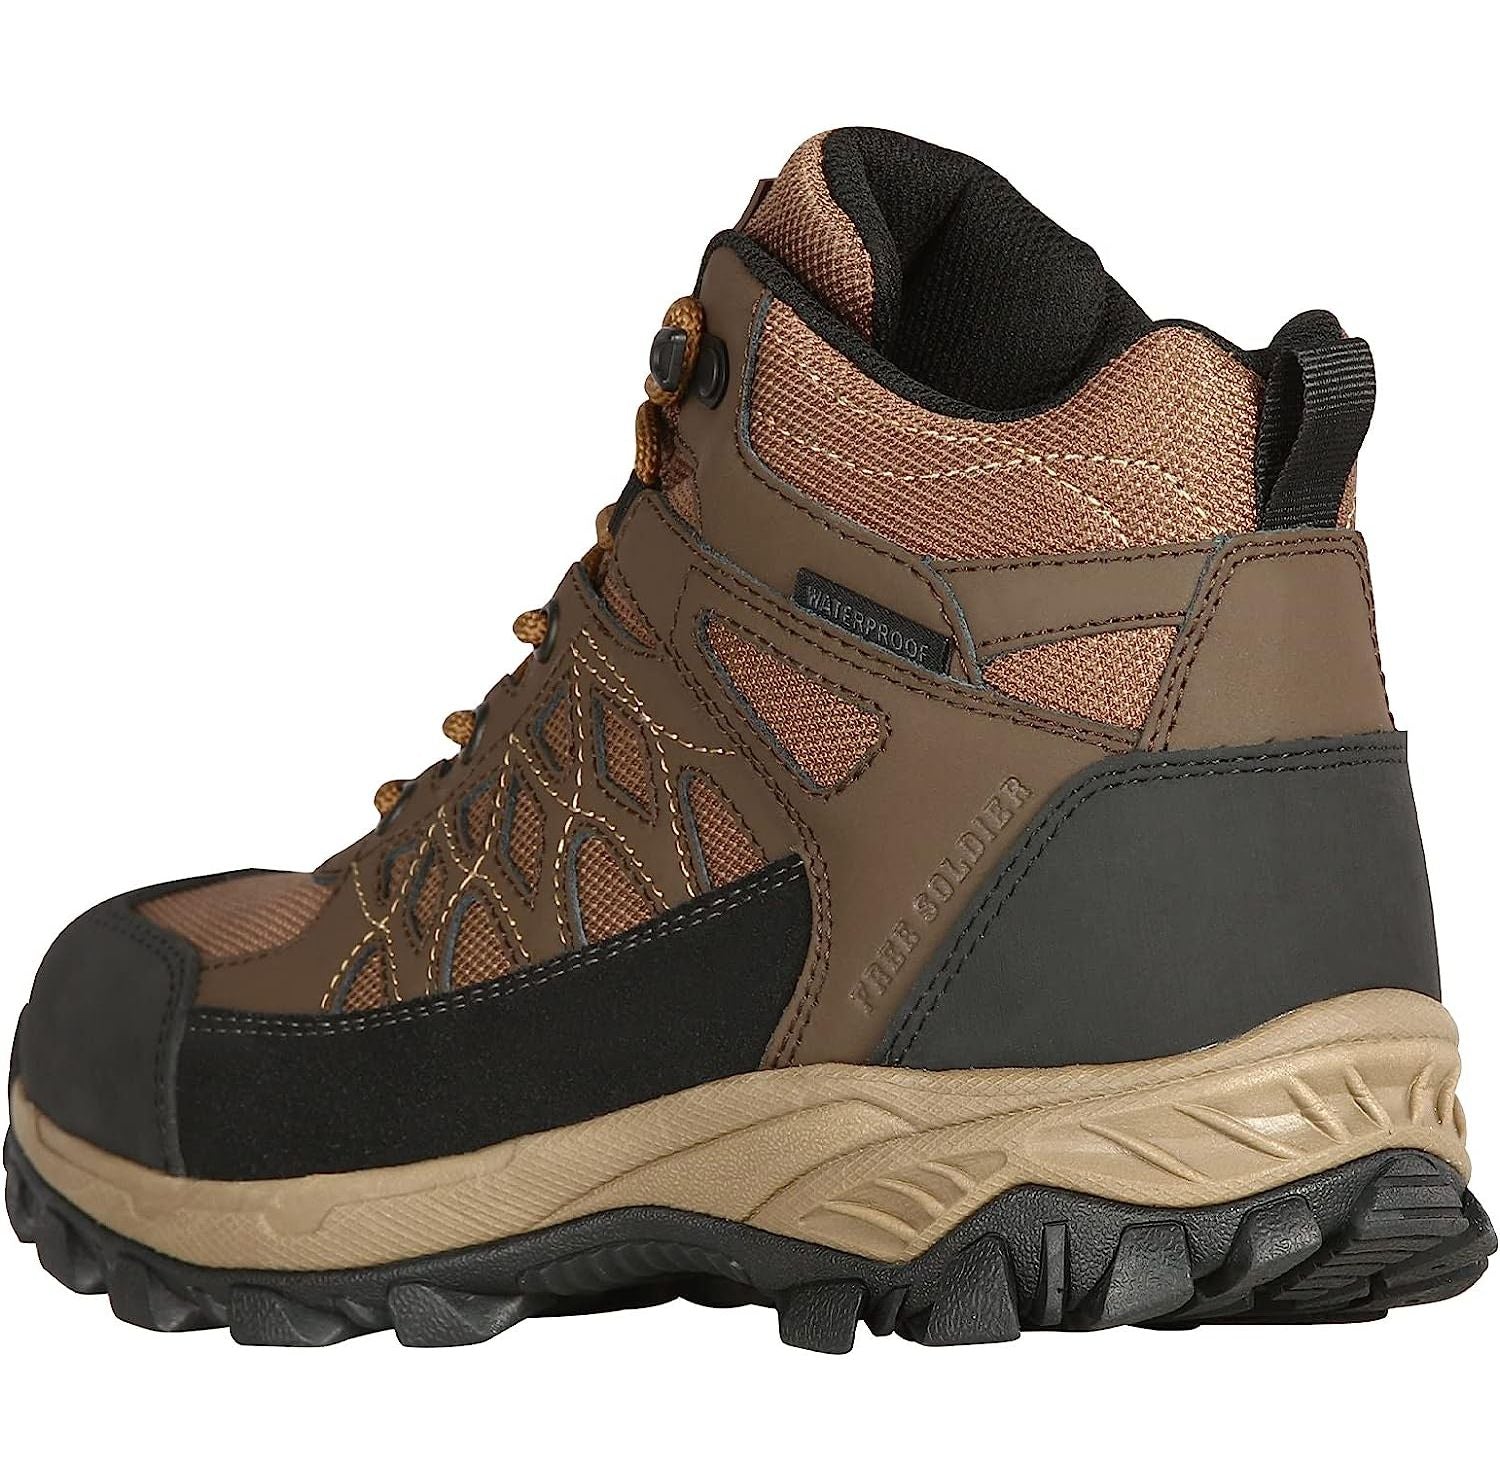 Ankle High WaterProof Hiking Boots